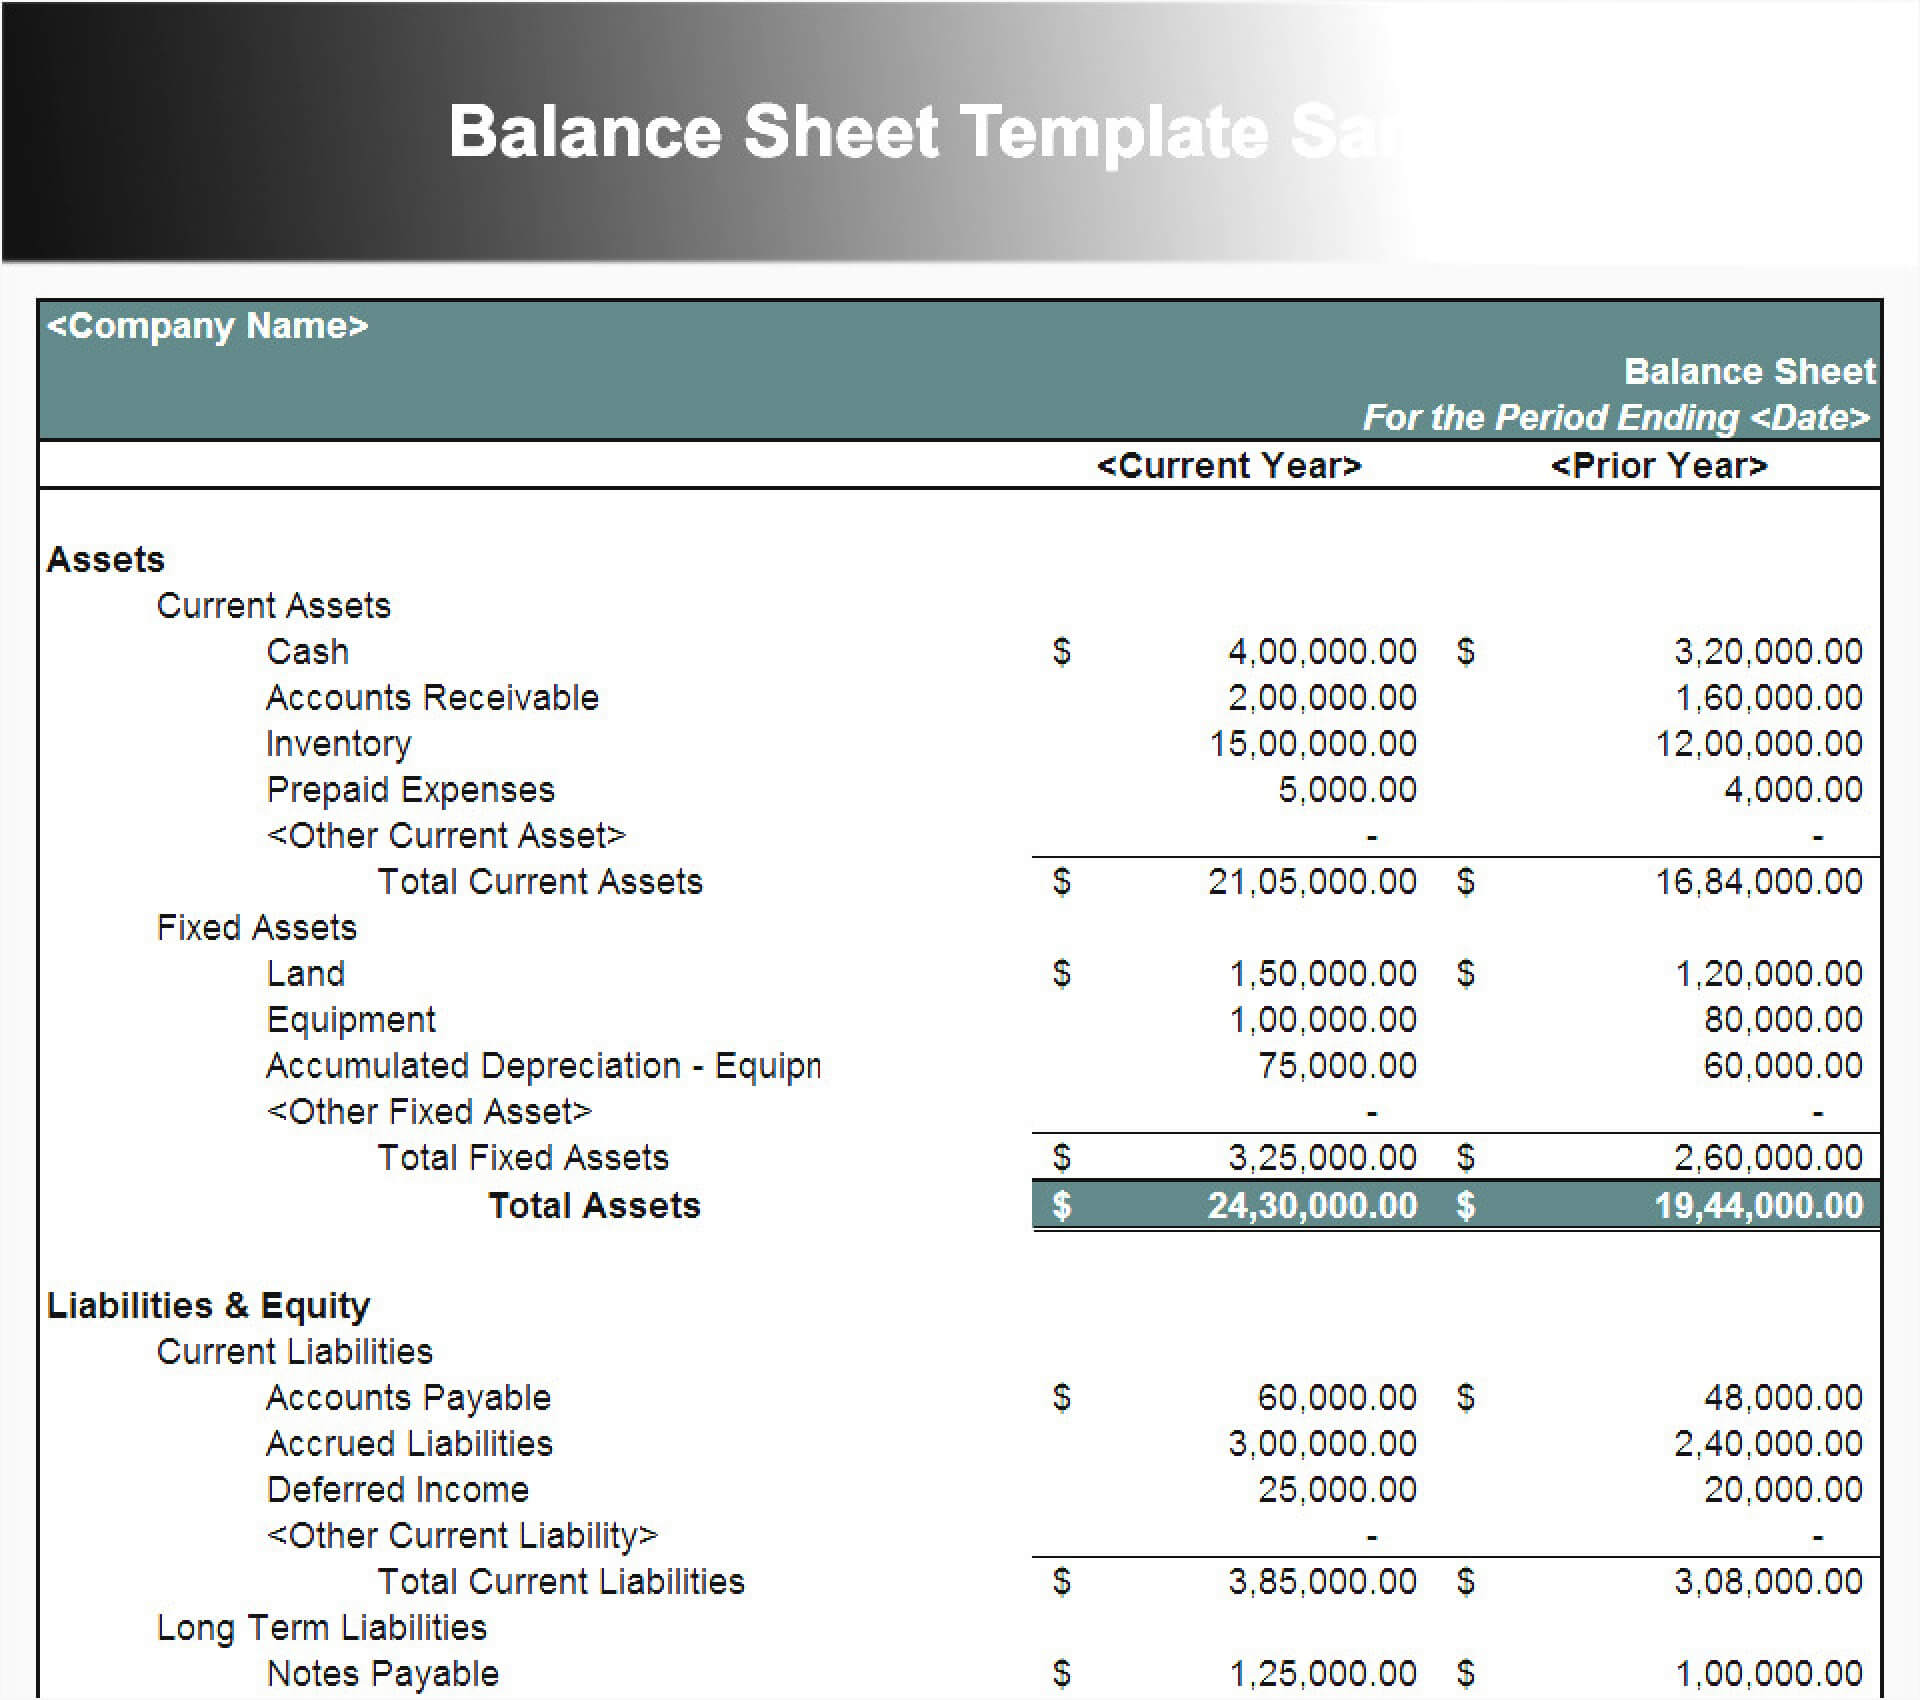 006 Balance Sheet Template For Small Business Free 1920X1700 For Balance Sheet Template For Small Business